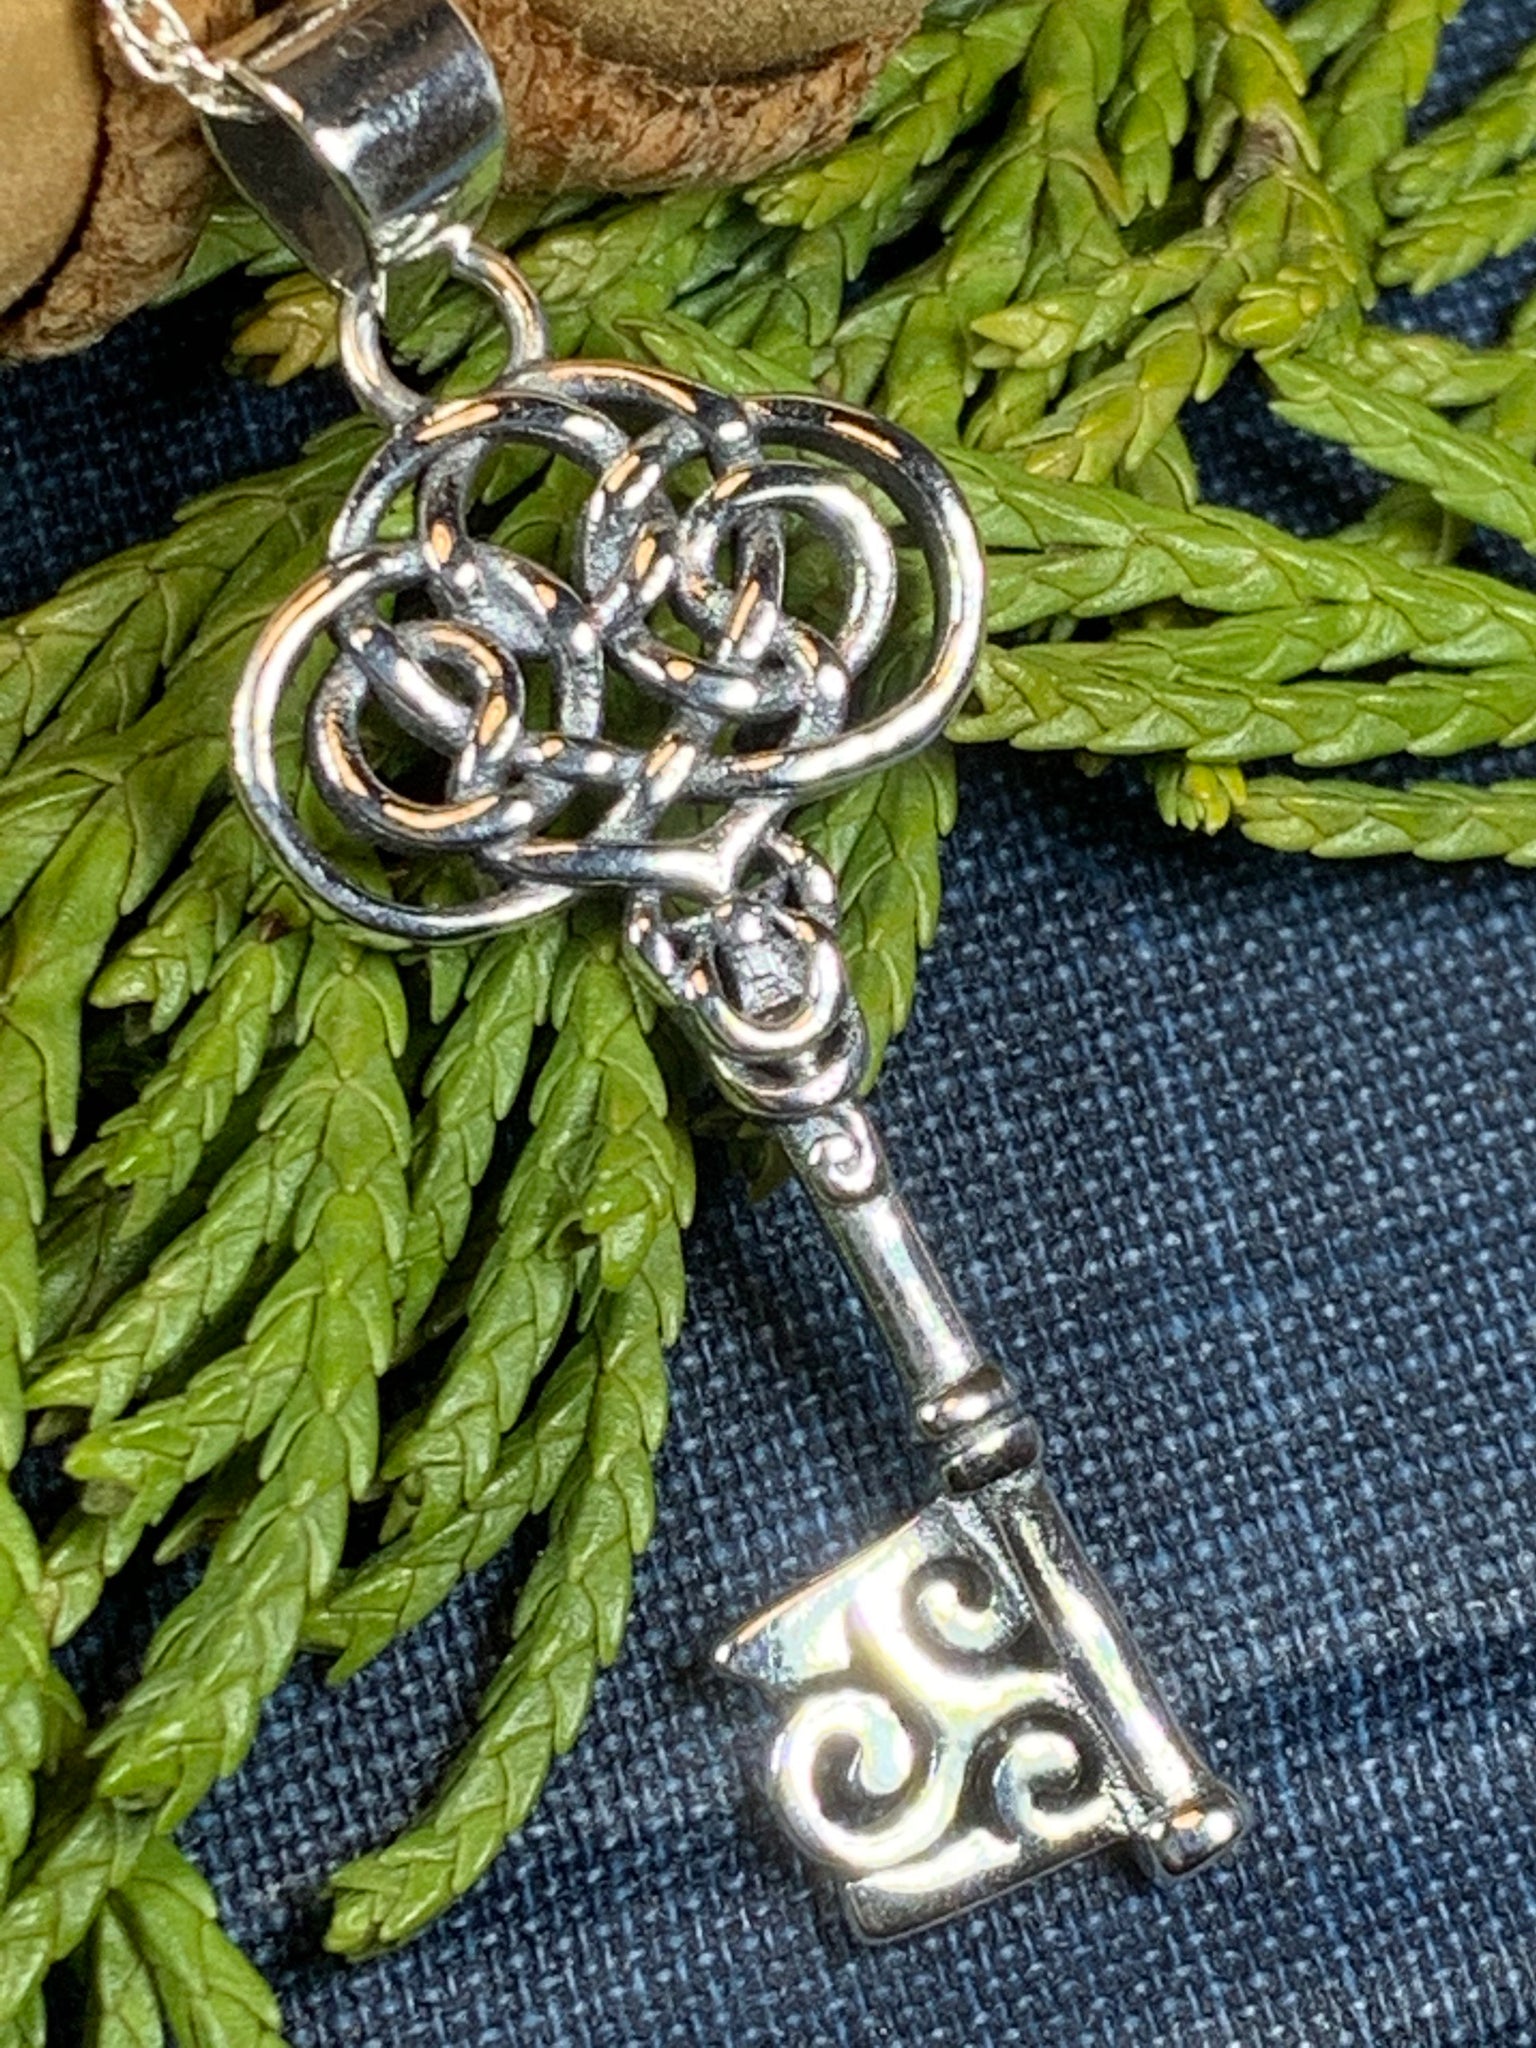 key chain necklace